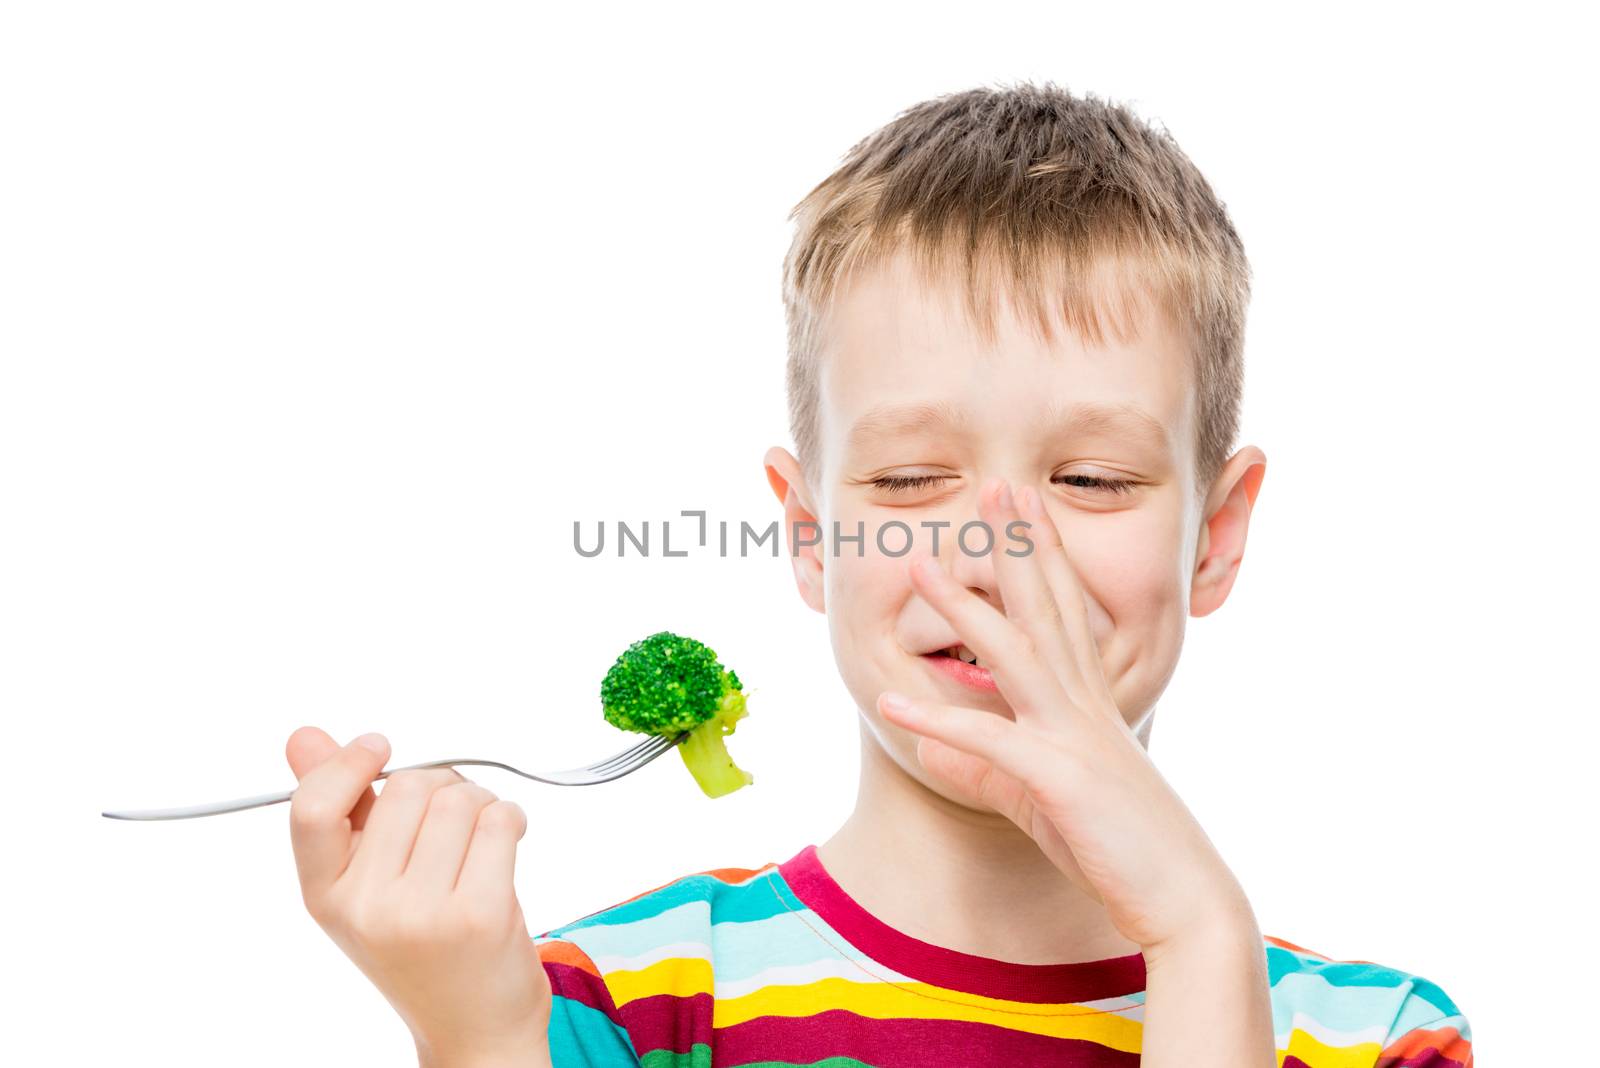 The boy with contempt looks at broccoli, portrait is isolated on white background